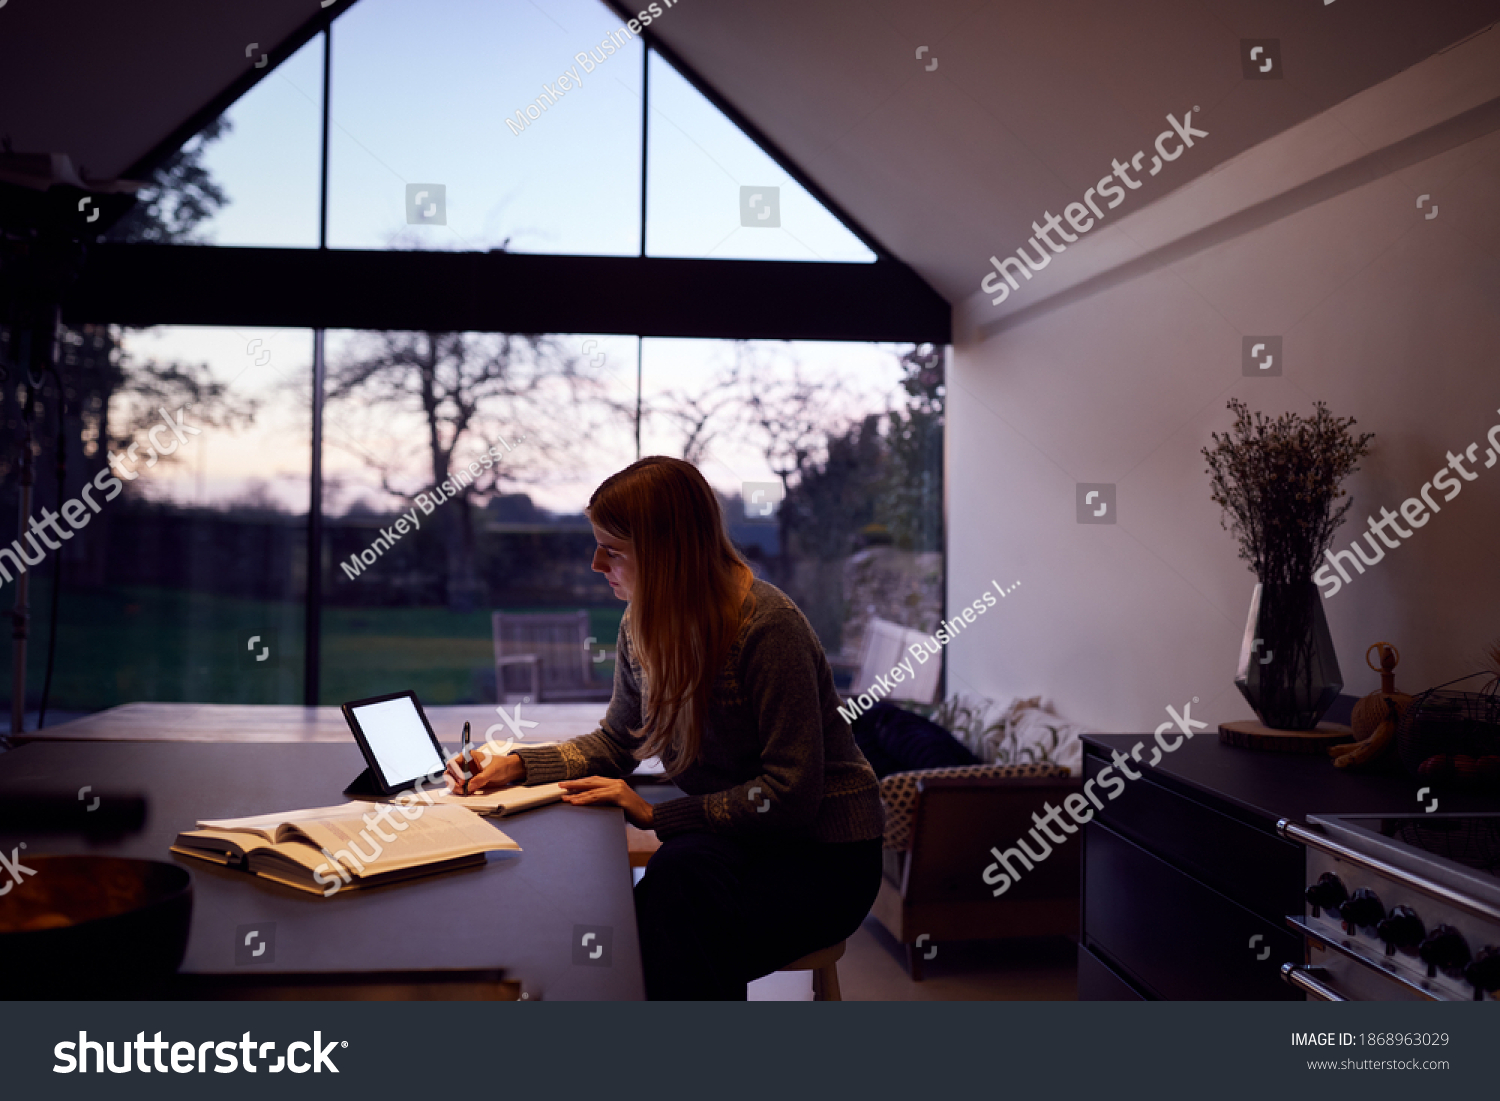 Evening Shot Of Woman In Kitchen Working Or Studying From Home Using Digital Tablet #1868963029